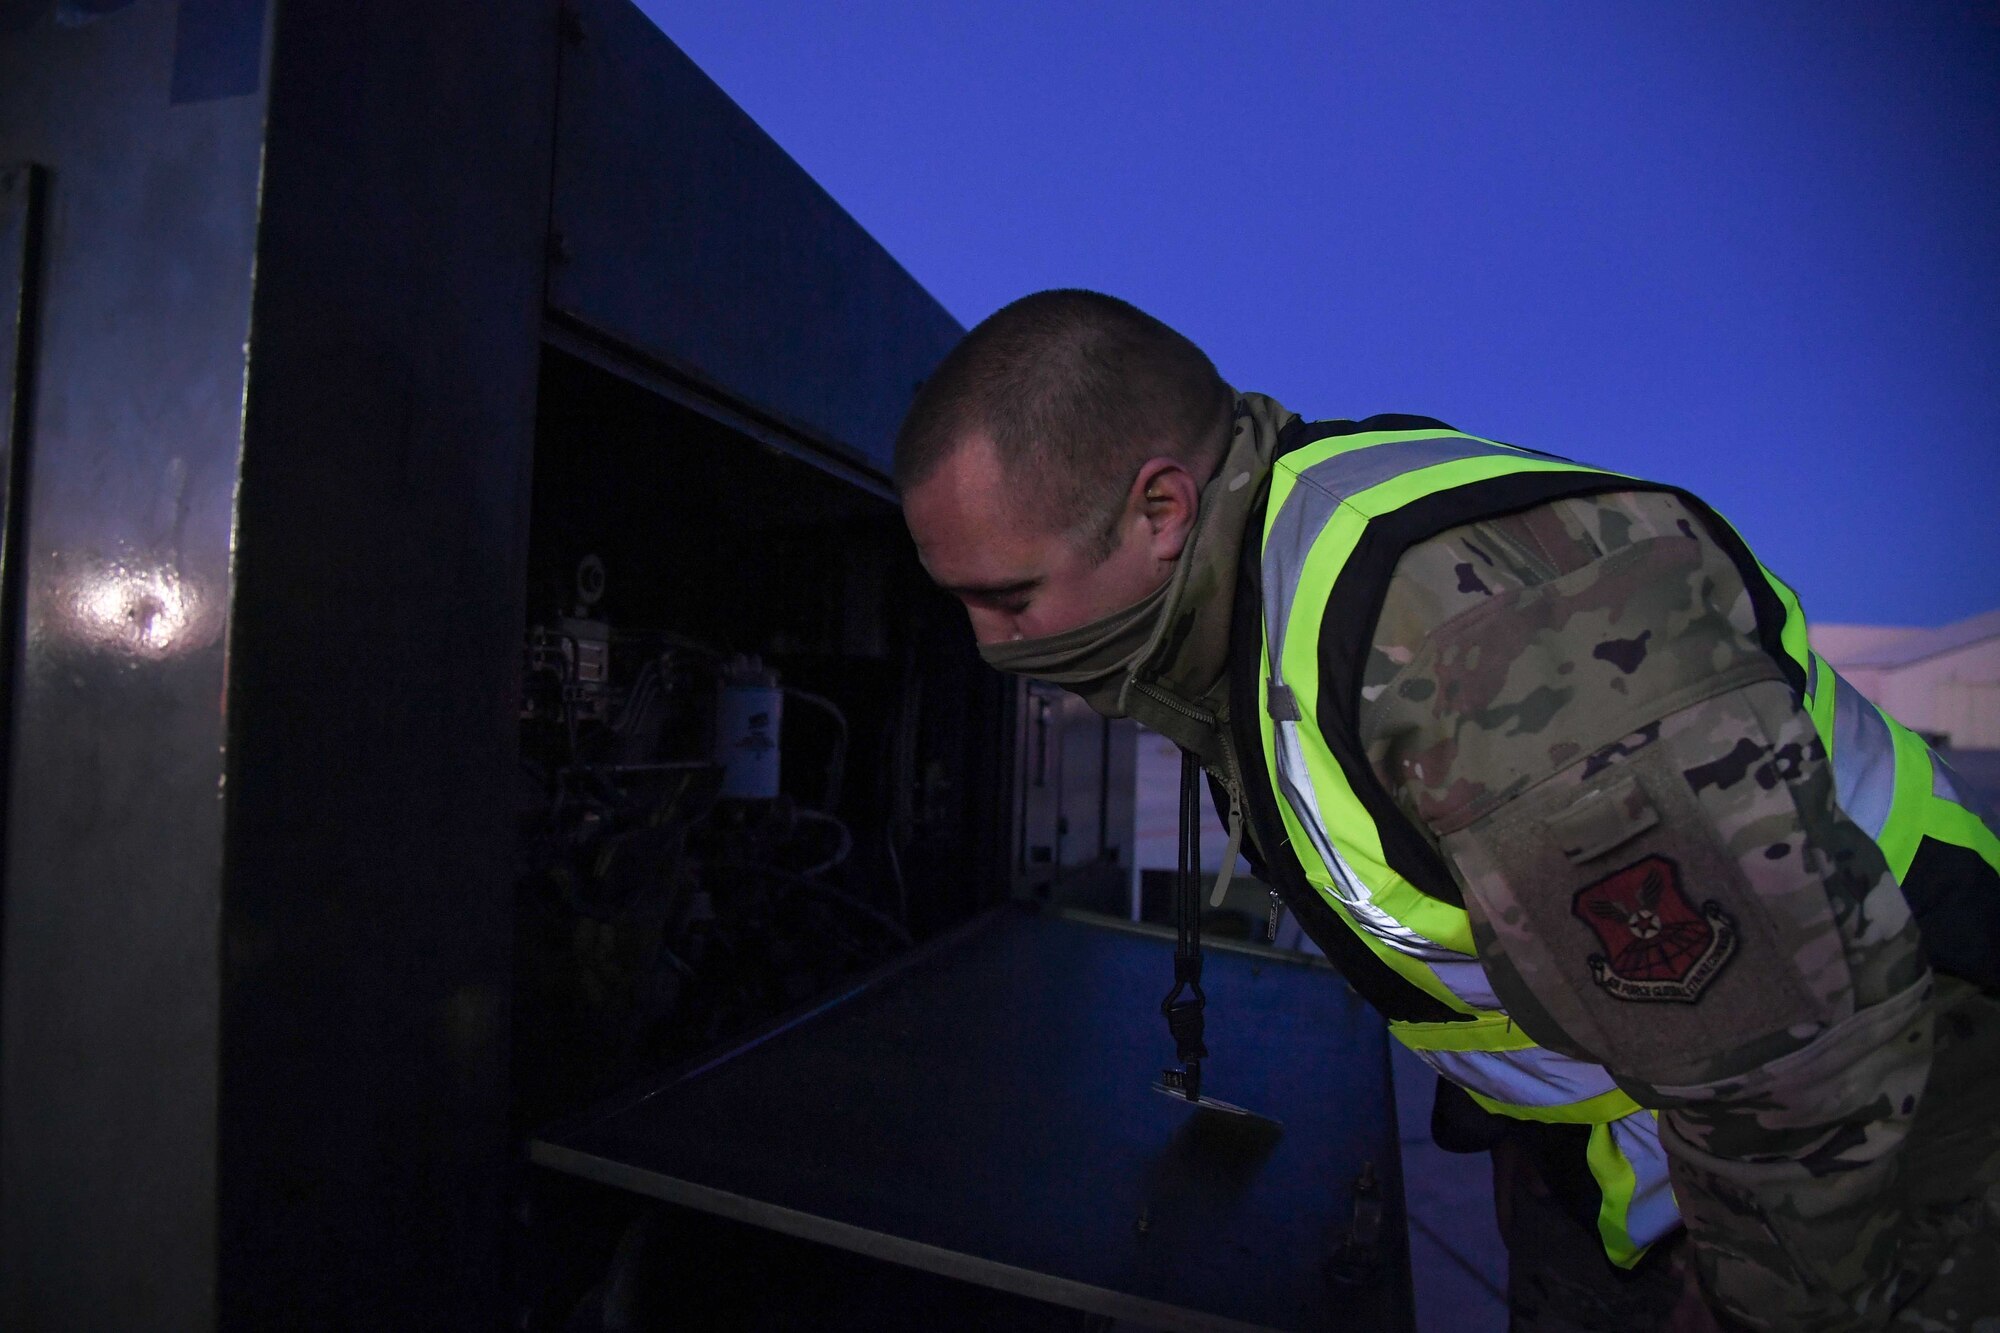 MSgt. Ryan Cordell is a part of the 5th Bomb Wing's Wing Inspection Team, which consists of performing inspections of the 5th Bomb Wing during exercises.